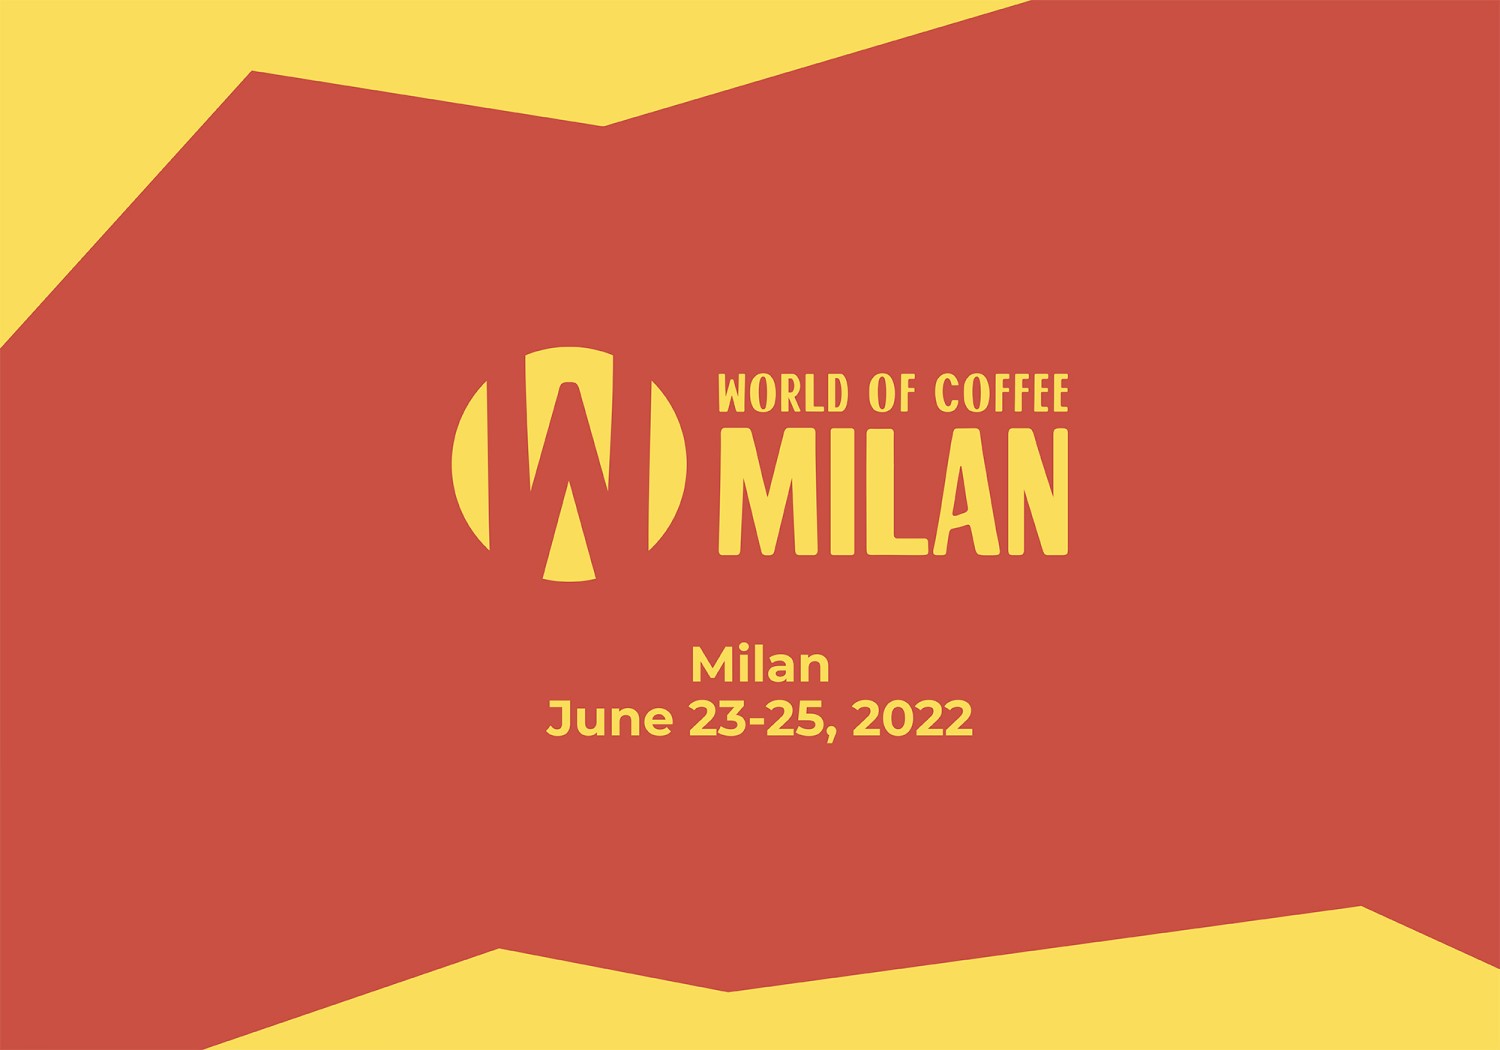 Ceado Coffee at World of Coffee 2022